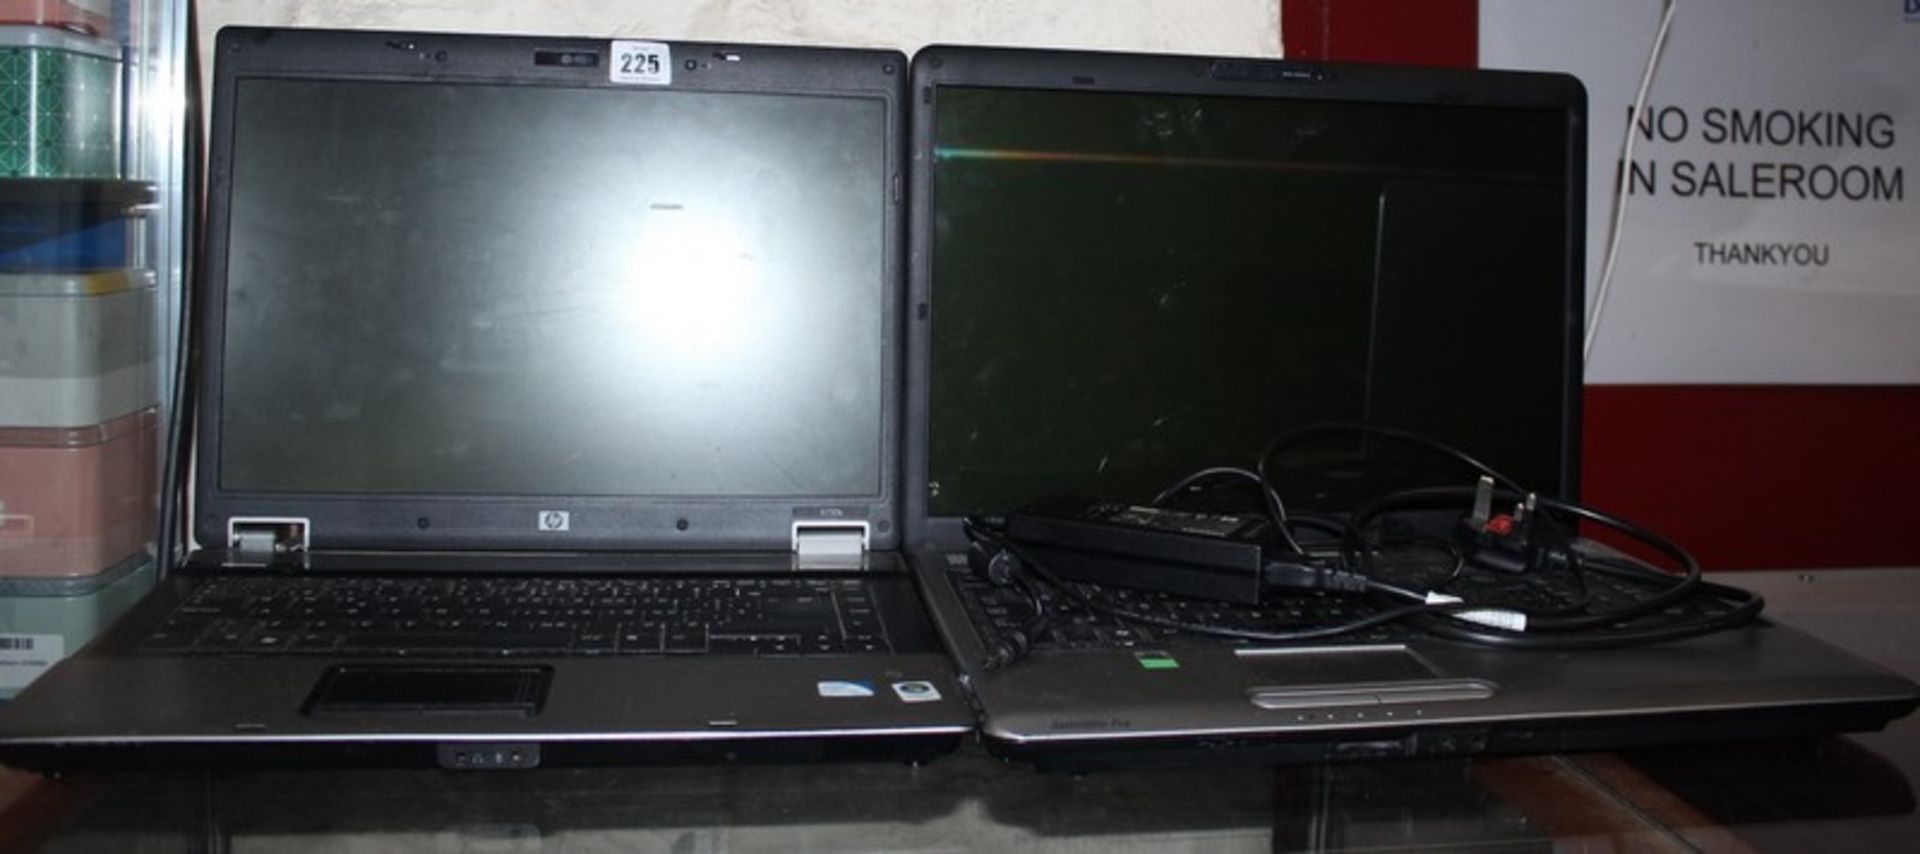 A Toshiba Satellite Pro P300-276 with charger (Hard drive removed) and a HP Compaq 6730b laptop (